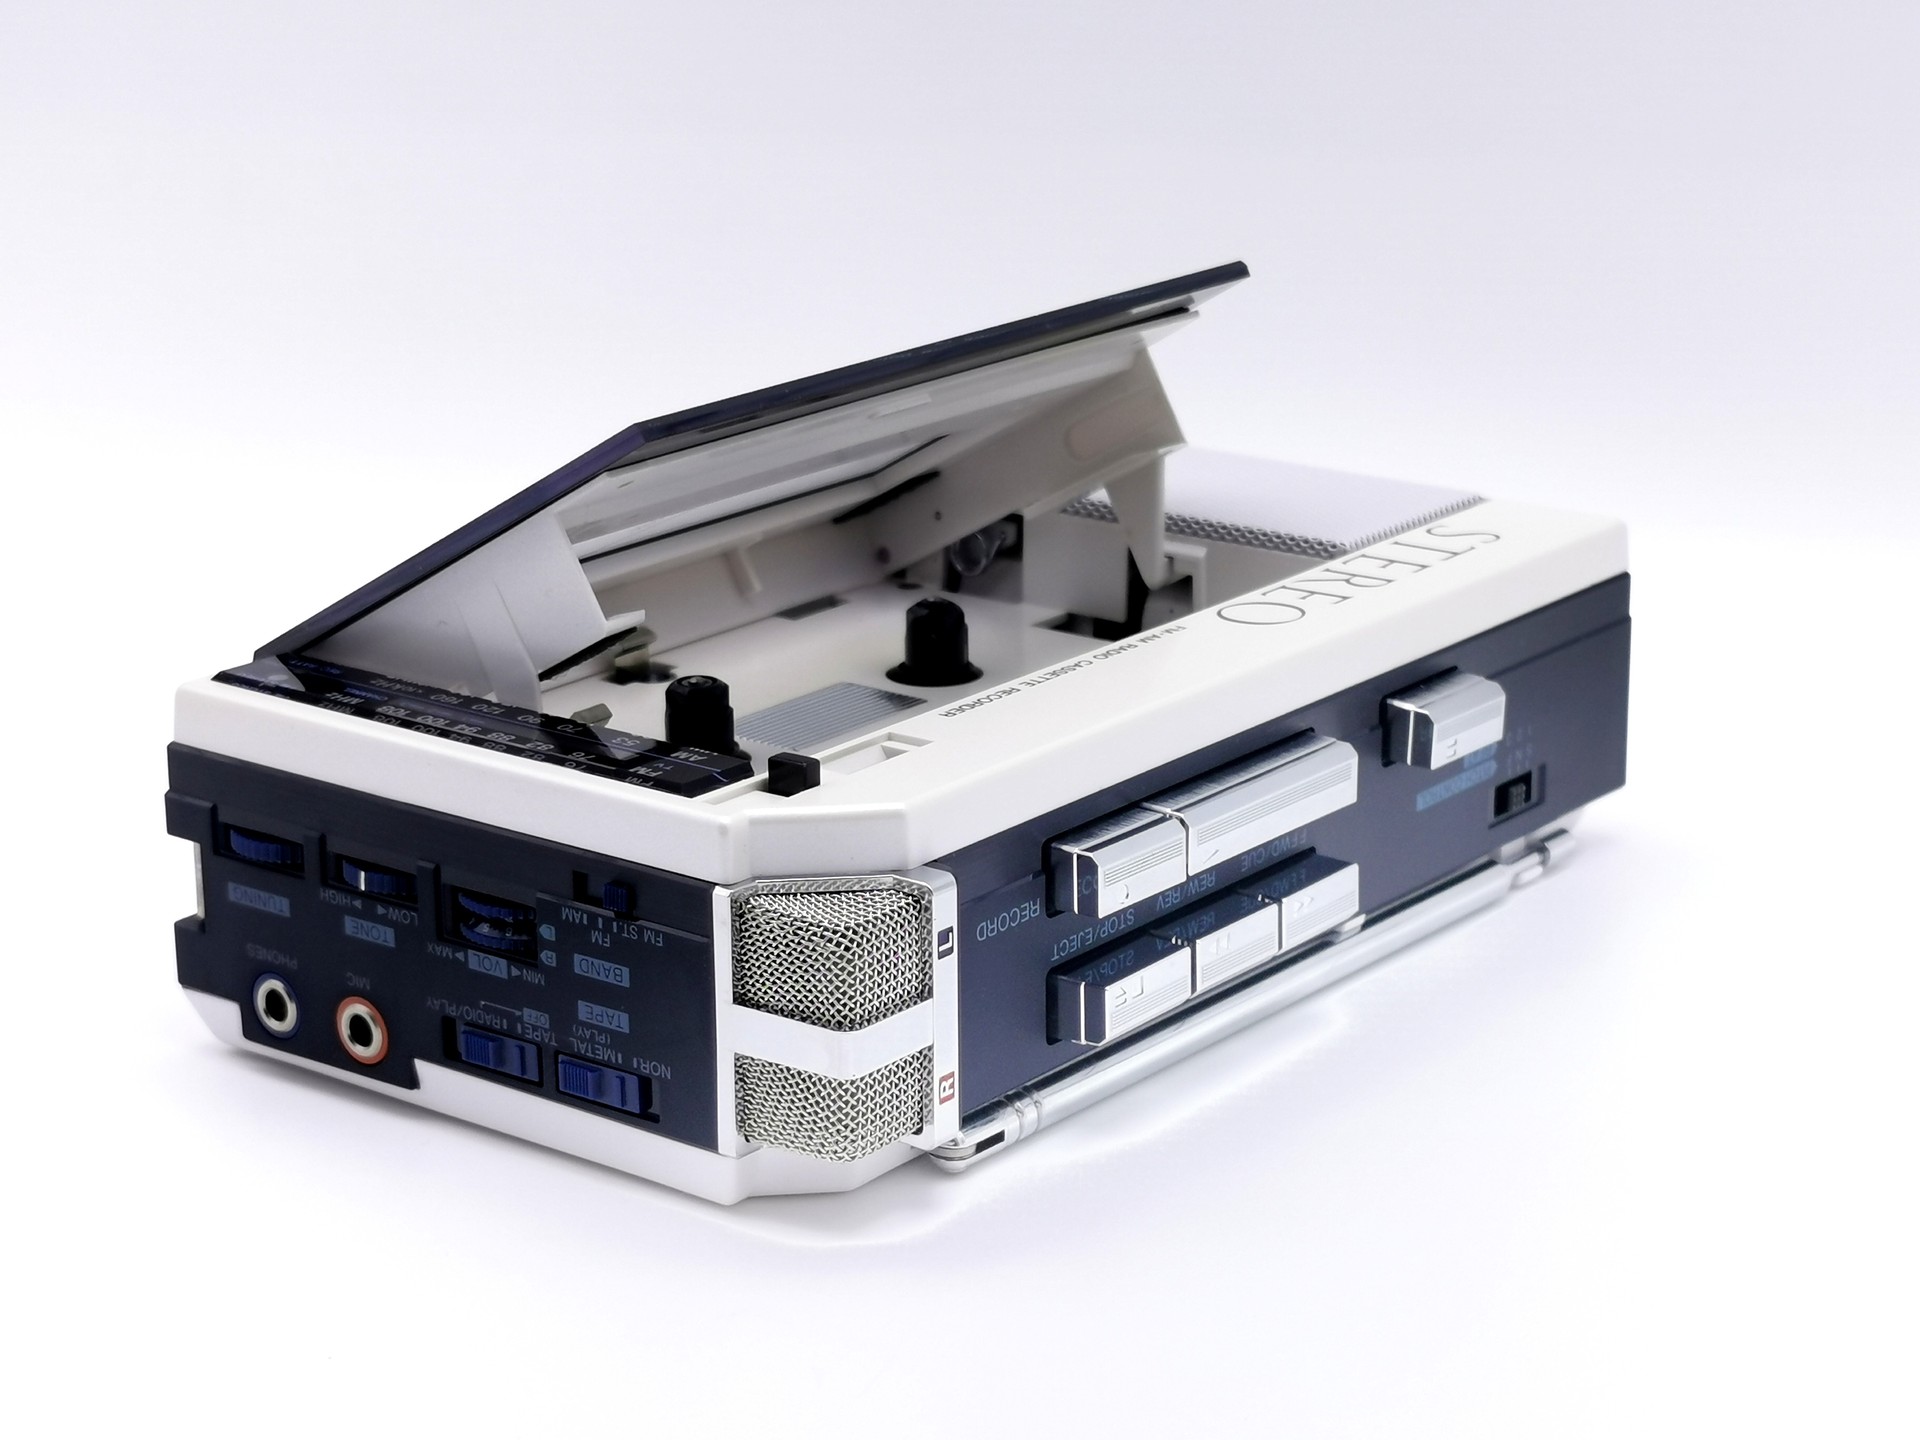 Sanyo_MR-S7_-_Top_side_front_angled_deck_view_ig-boxedwalkman